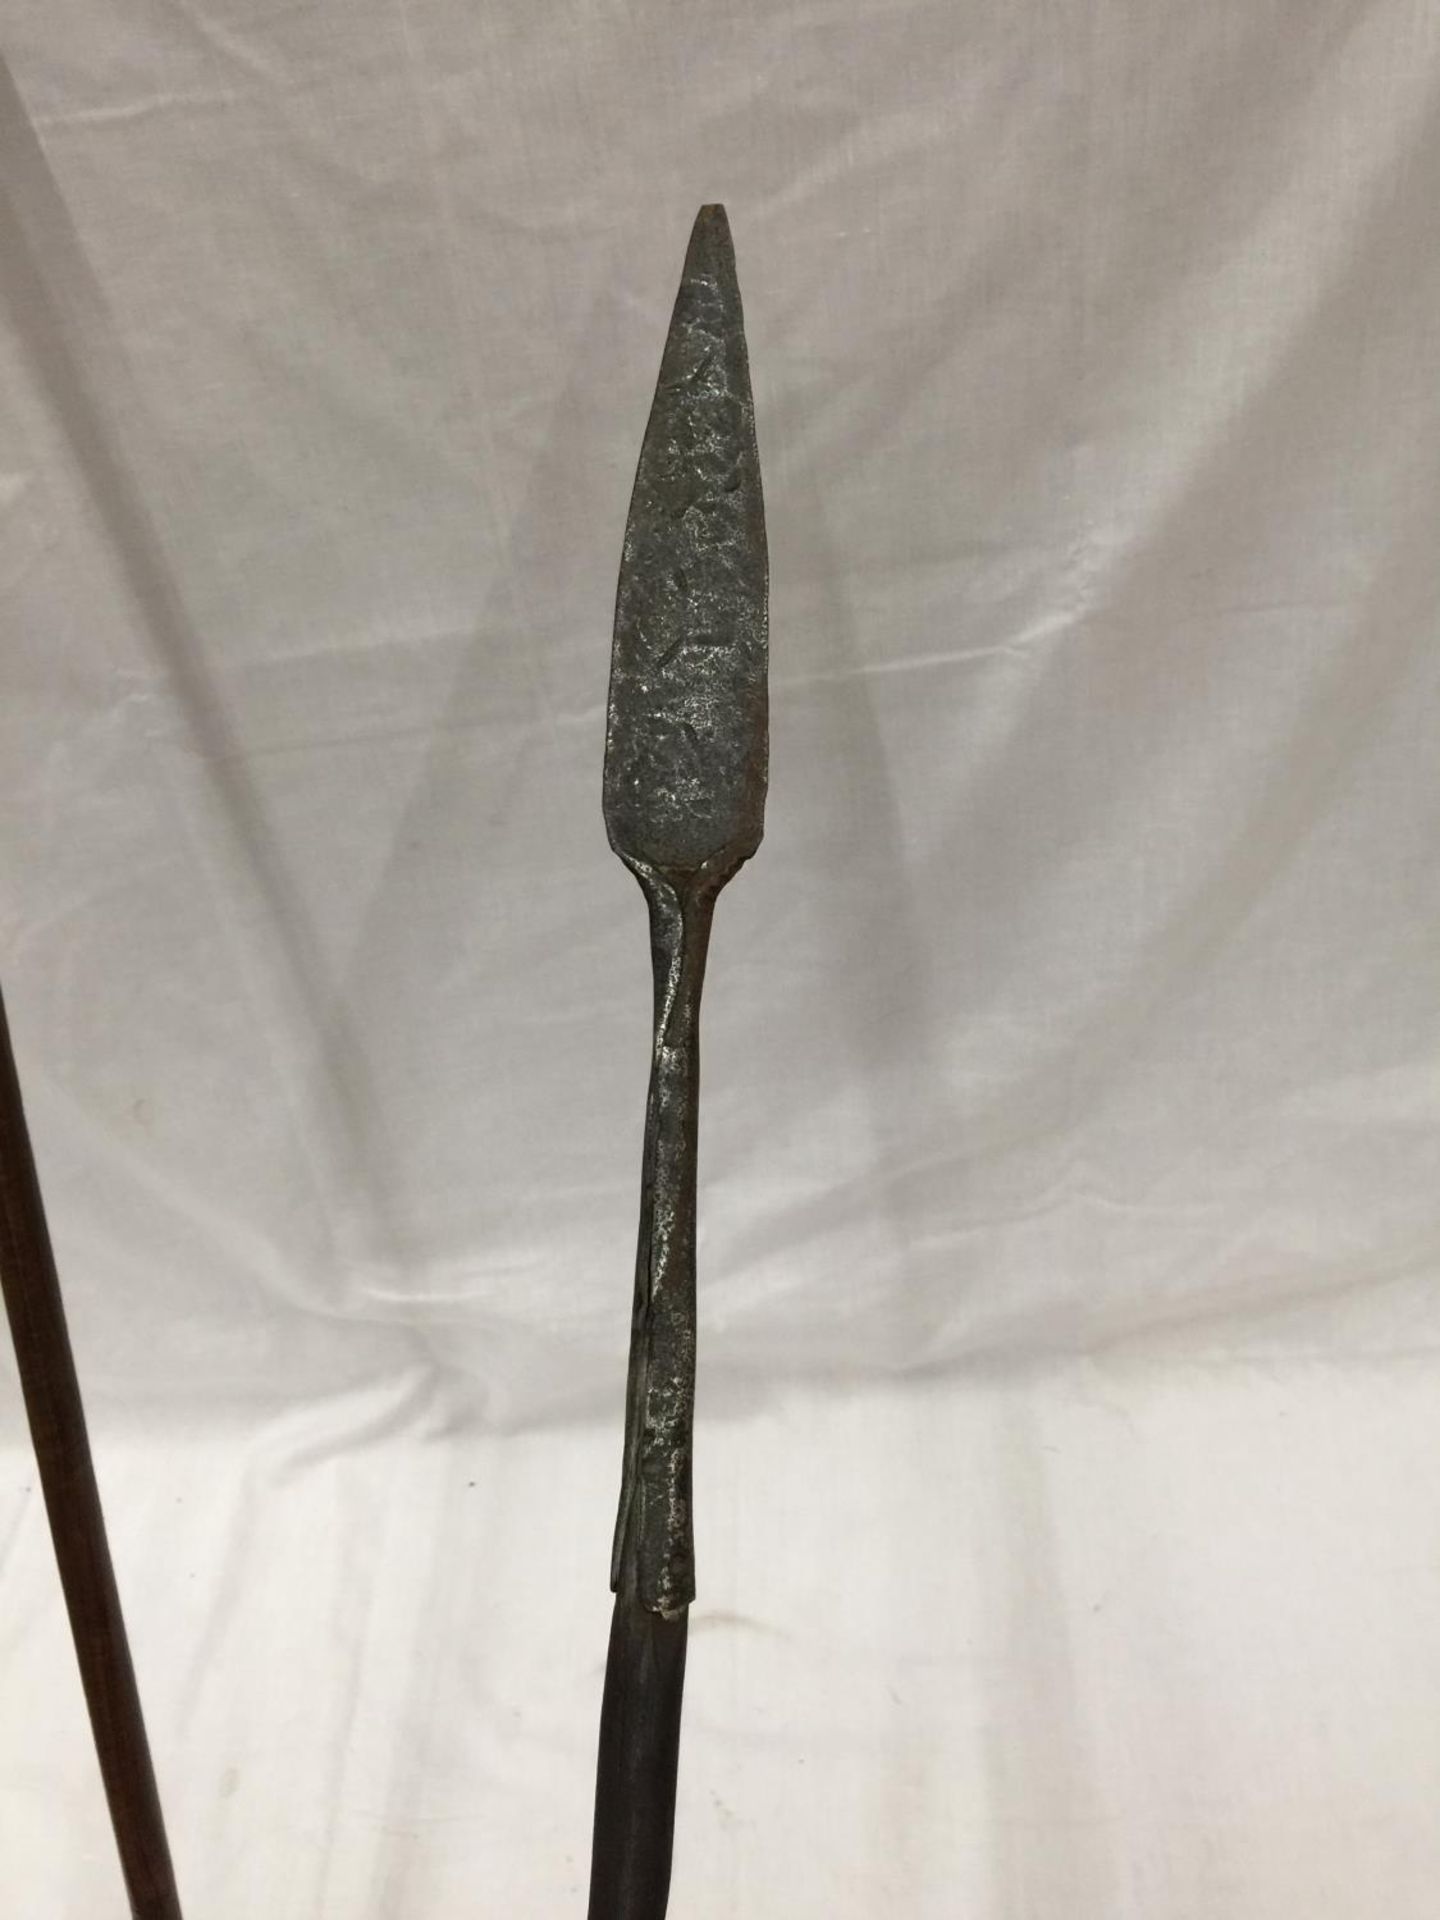 A VINTAGE 'HUNTING' SPEAR WITH METAL TIP LENGTH 150CM AND A WOODEN SPEAR LENGTH 118CM - Image 5 of 5